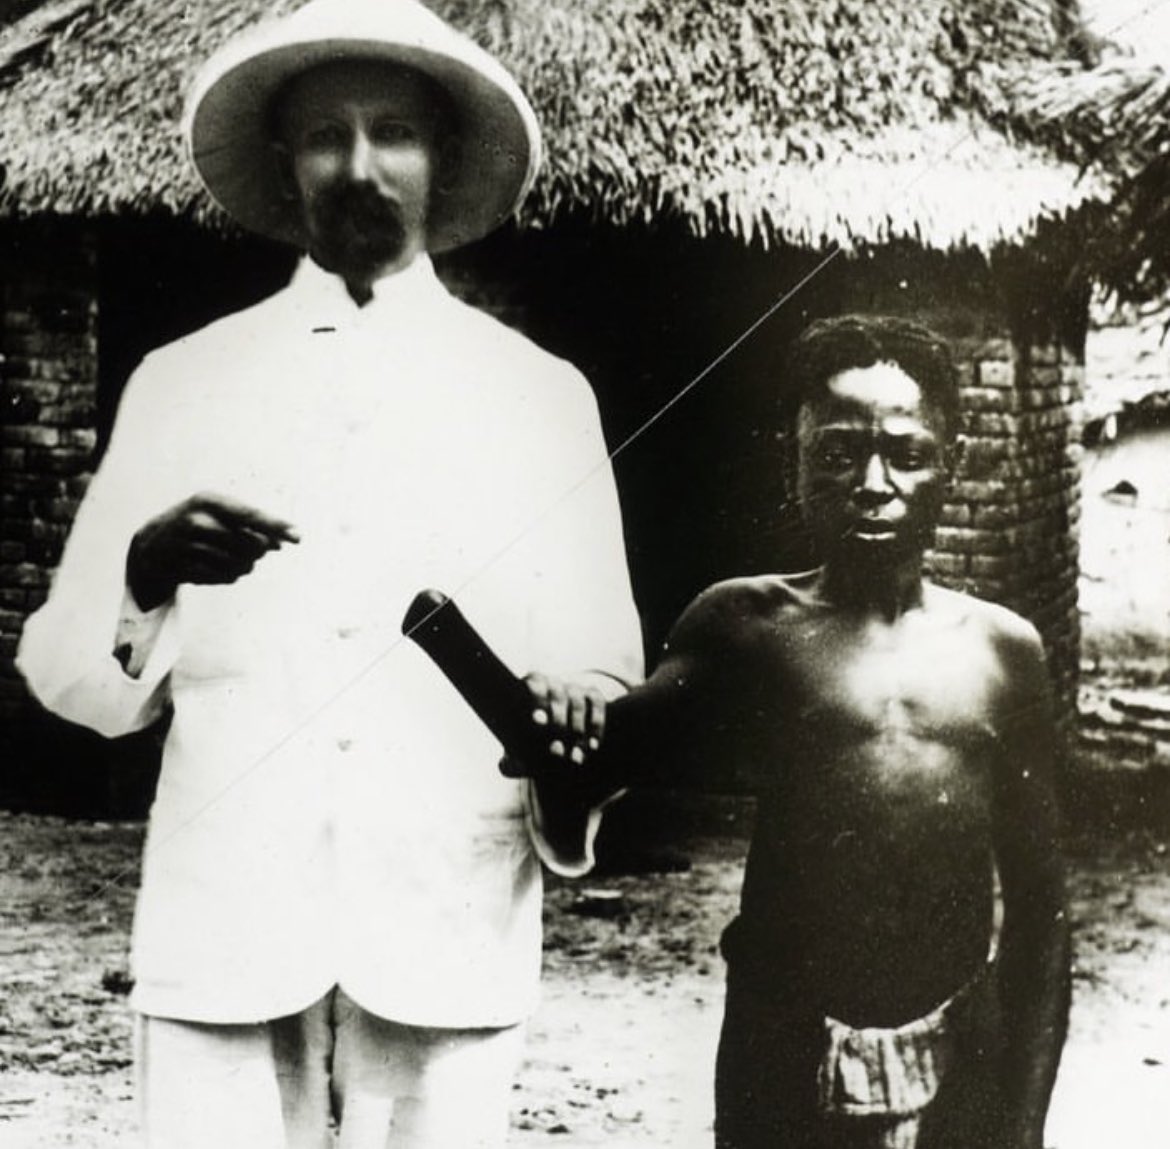 During the late 19th and early 20th centuries, King Leopold II of Belgium ruled over the Congo Free State as his personal colony. Under his exploitative regime, the Congolese people suffered immensely. King Leopold's primary motive was to extract as much wealth as possible from…